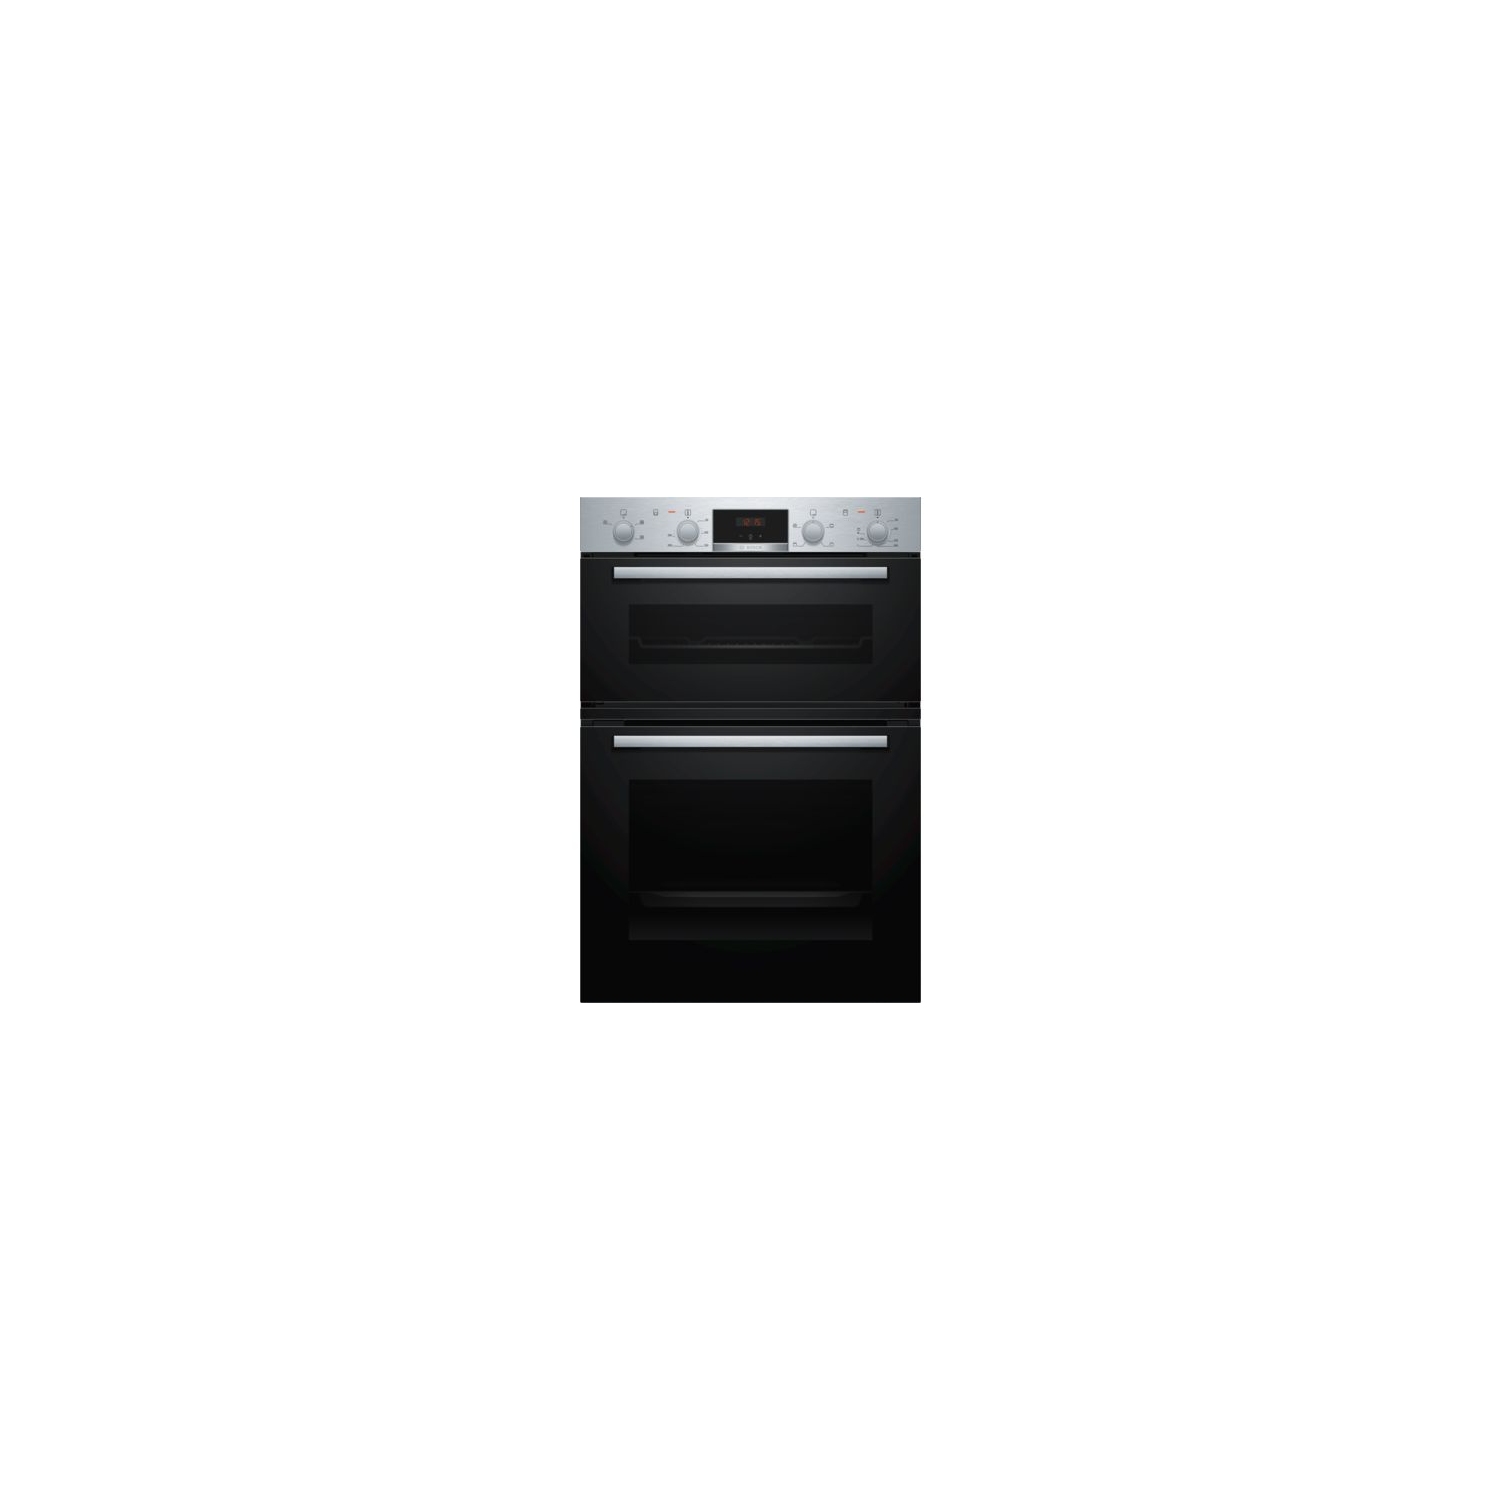 Bosch MHA133BR0B Stainless Steel Integrated Double Oven - 0